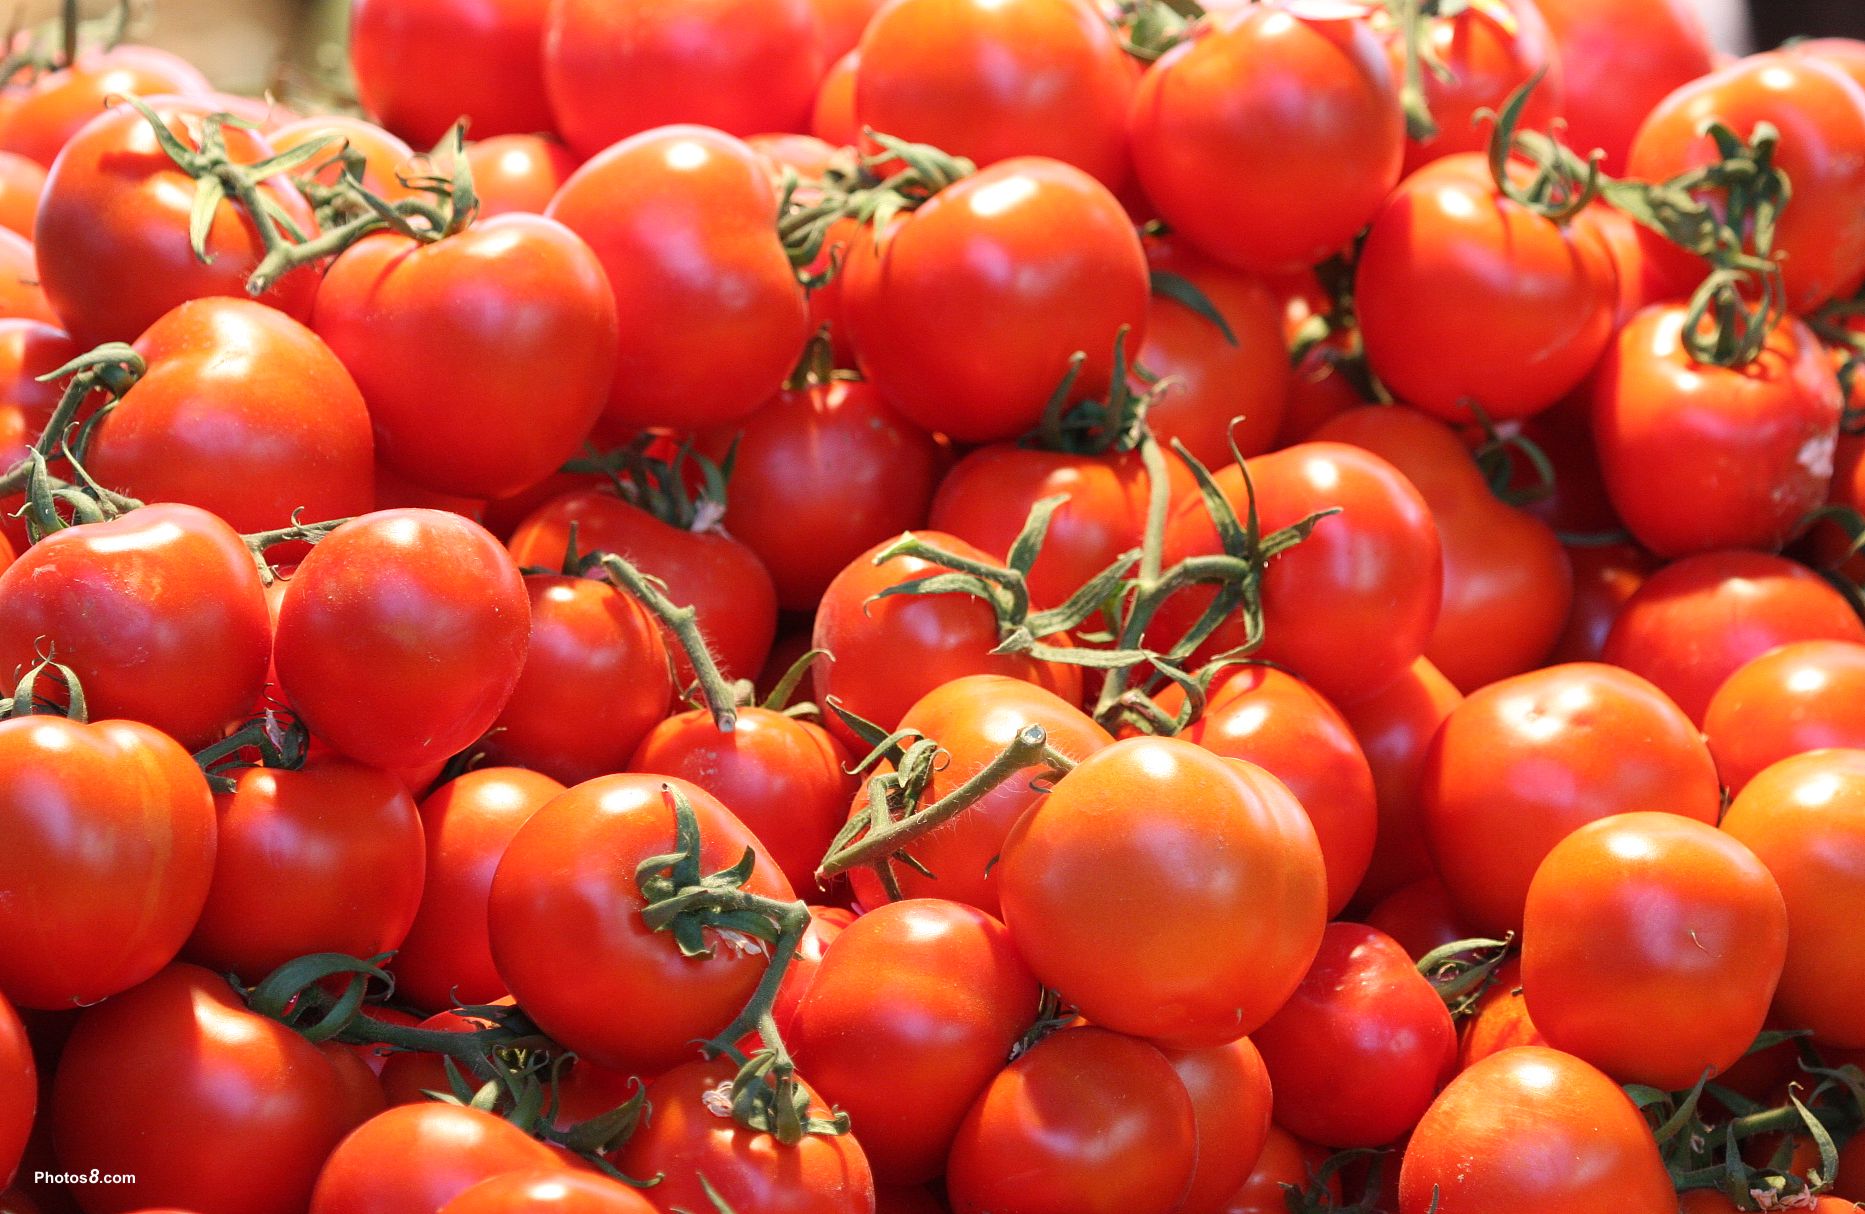 Red Isn't Just For Tomatoes! | Tomato 411